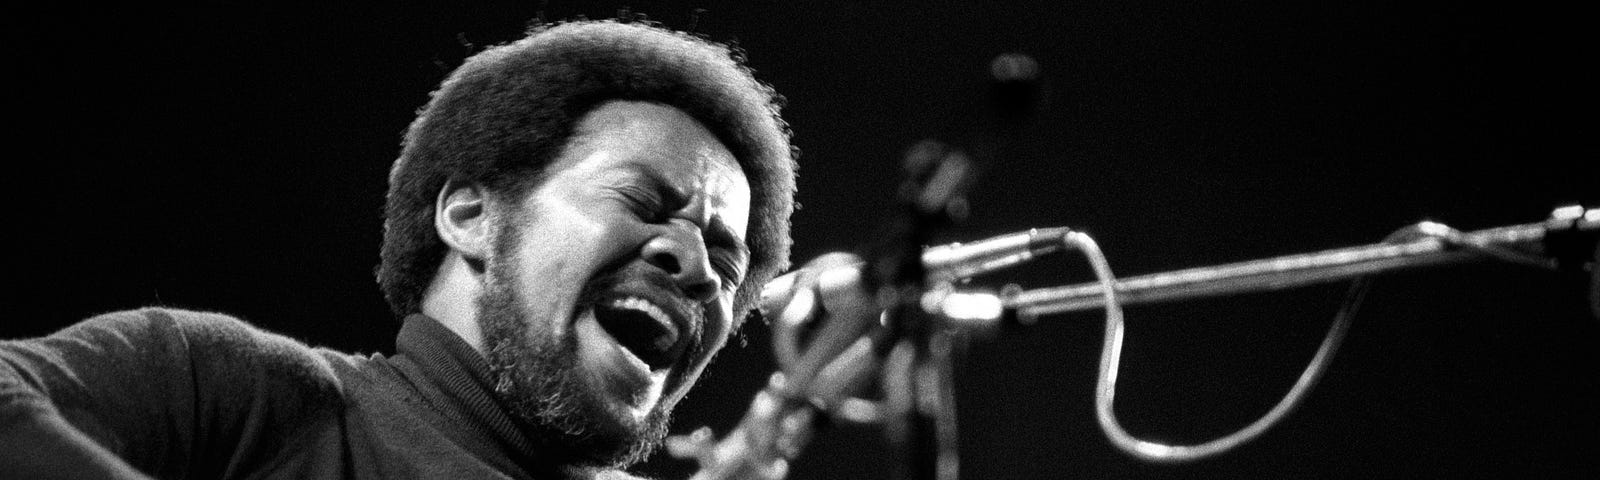 Photo of Bill Withers at the Rainbow Theatre in 1973.